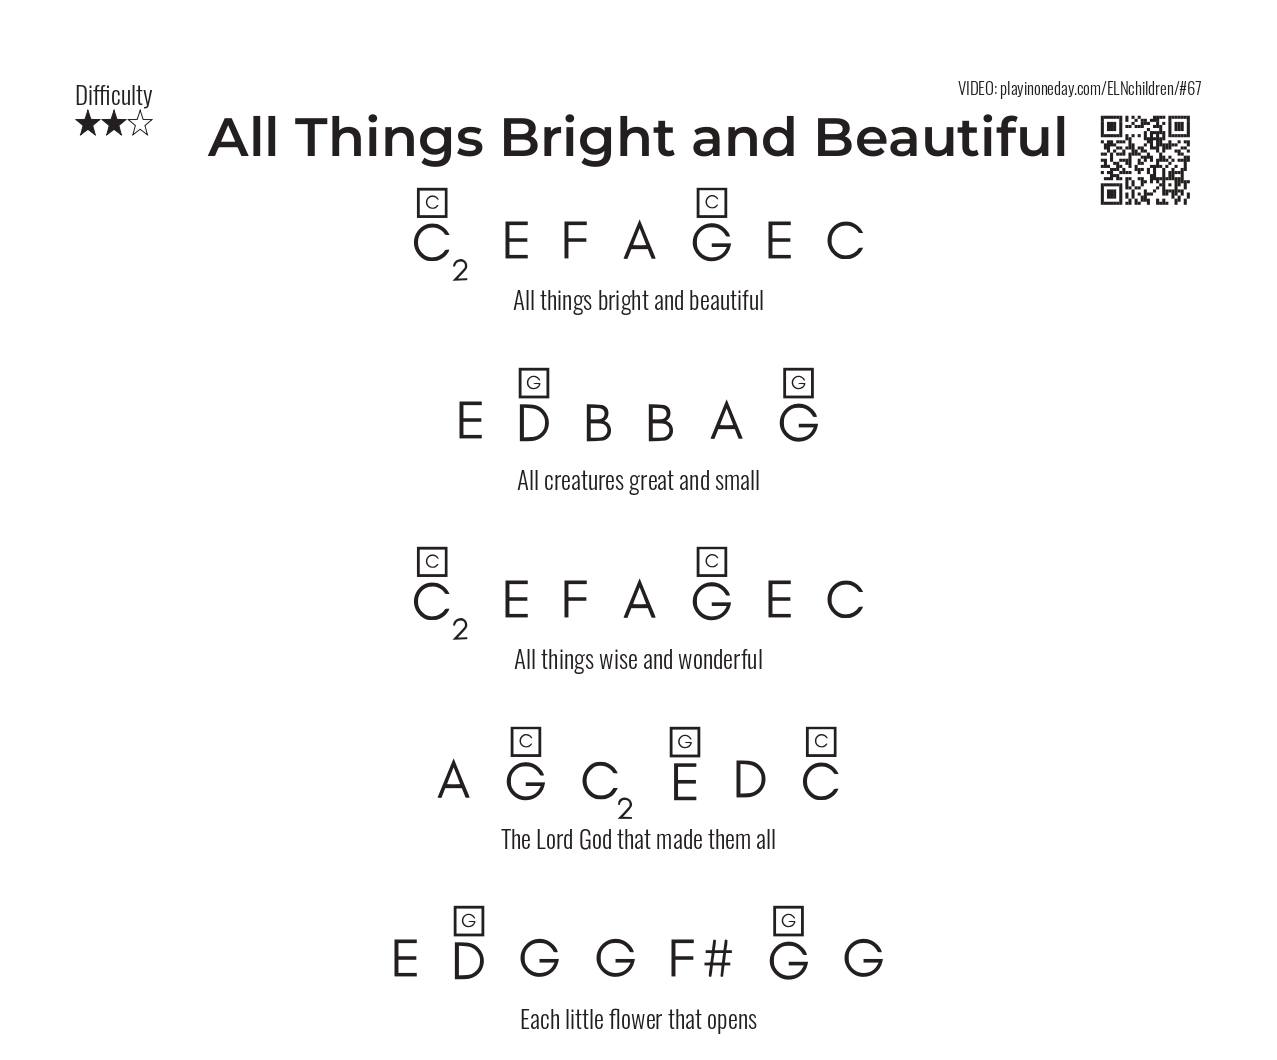 All Things Bright and Beautiful letter notes piano